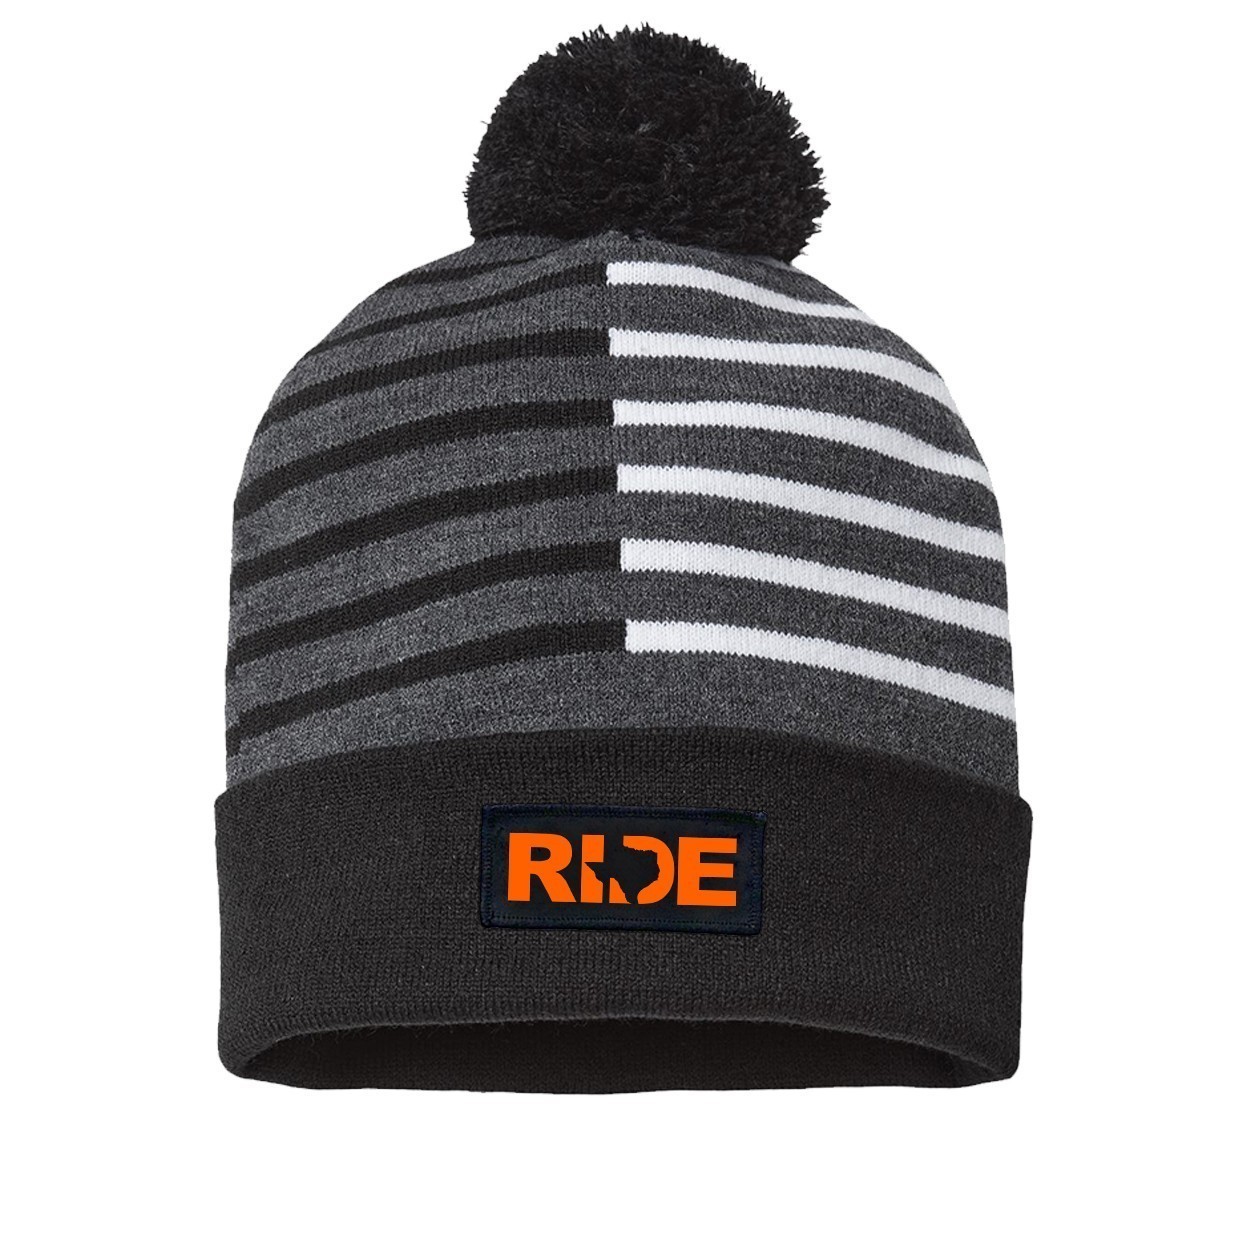 Ride Texas Night Out Woven Patch Roll Up Pom Knit Beanie Half Color Black/White (Orange Logo)